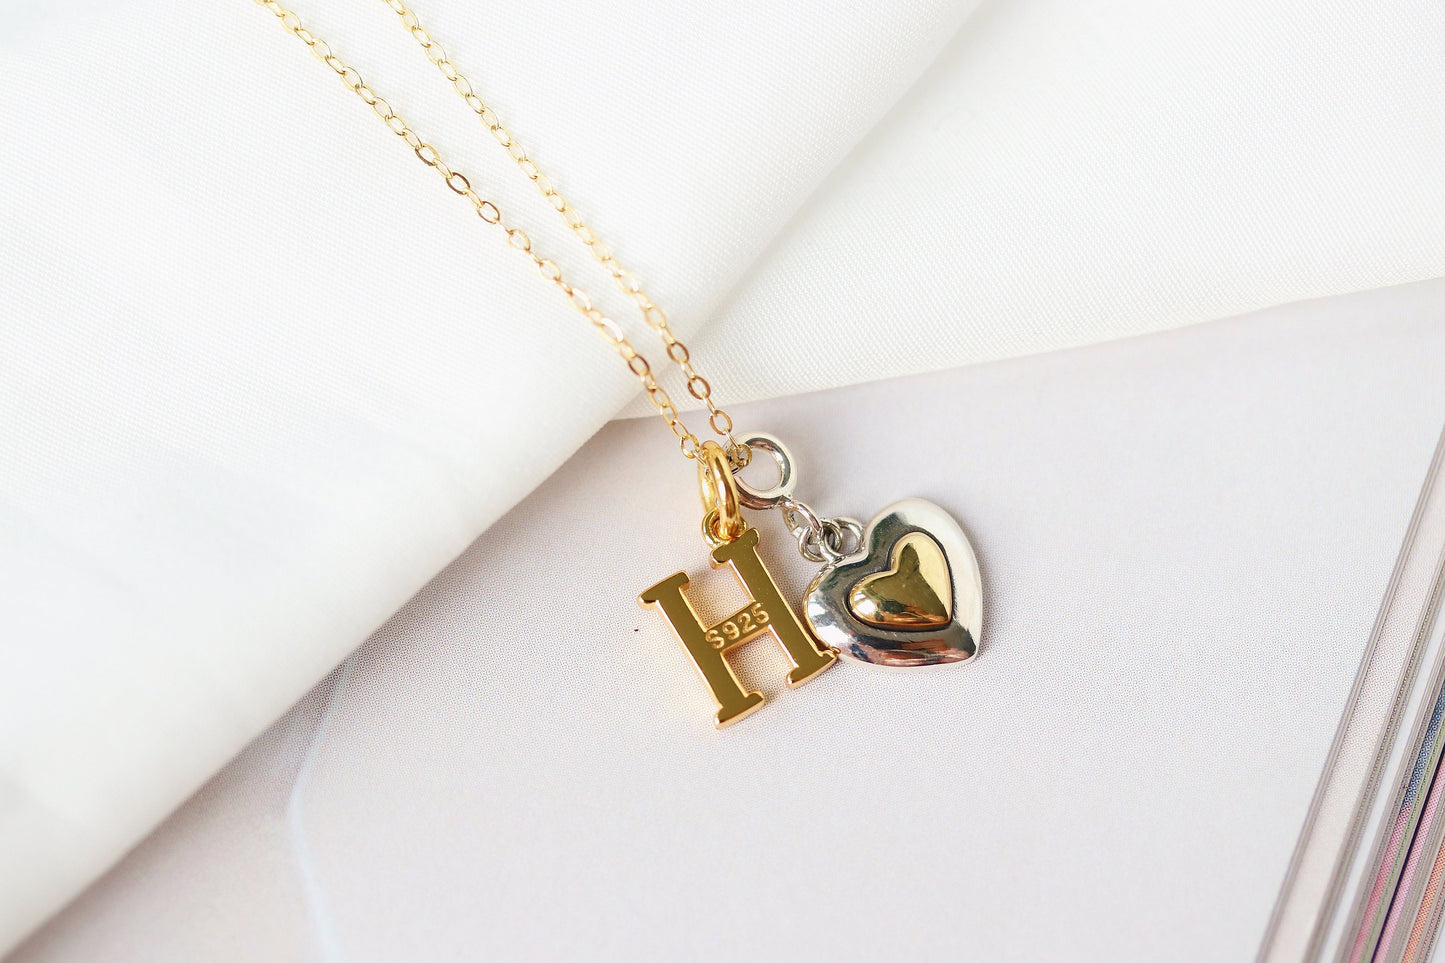 Sterling Silver Aunt & Niece Necklace, Gold Vermeil Initial Personalised Necklace, Gold Heart Pearl Charm Necklace,Gift for Auntie and Niece